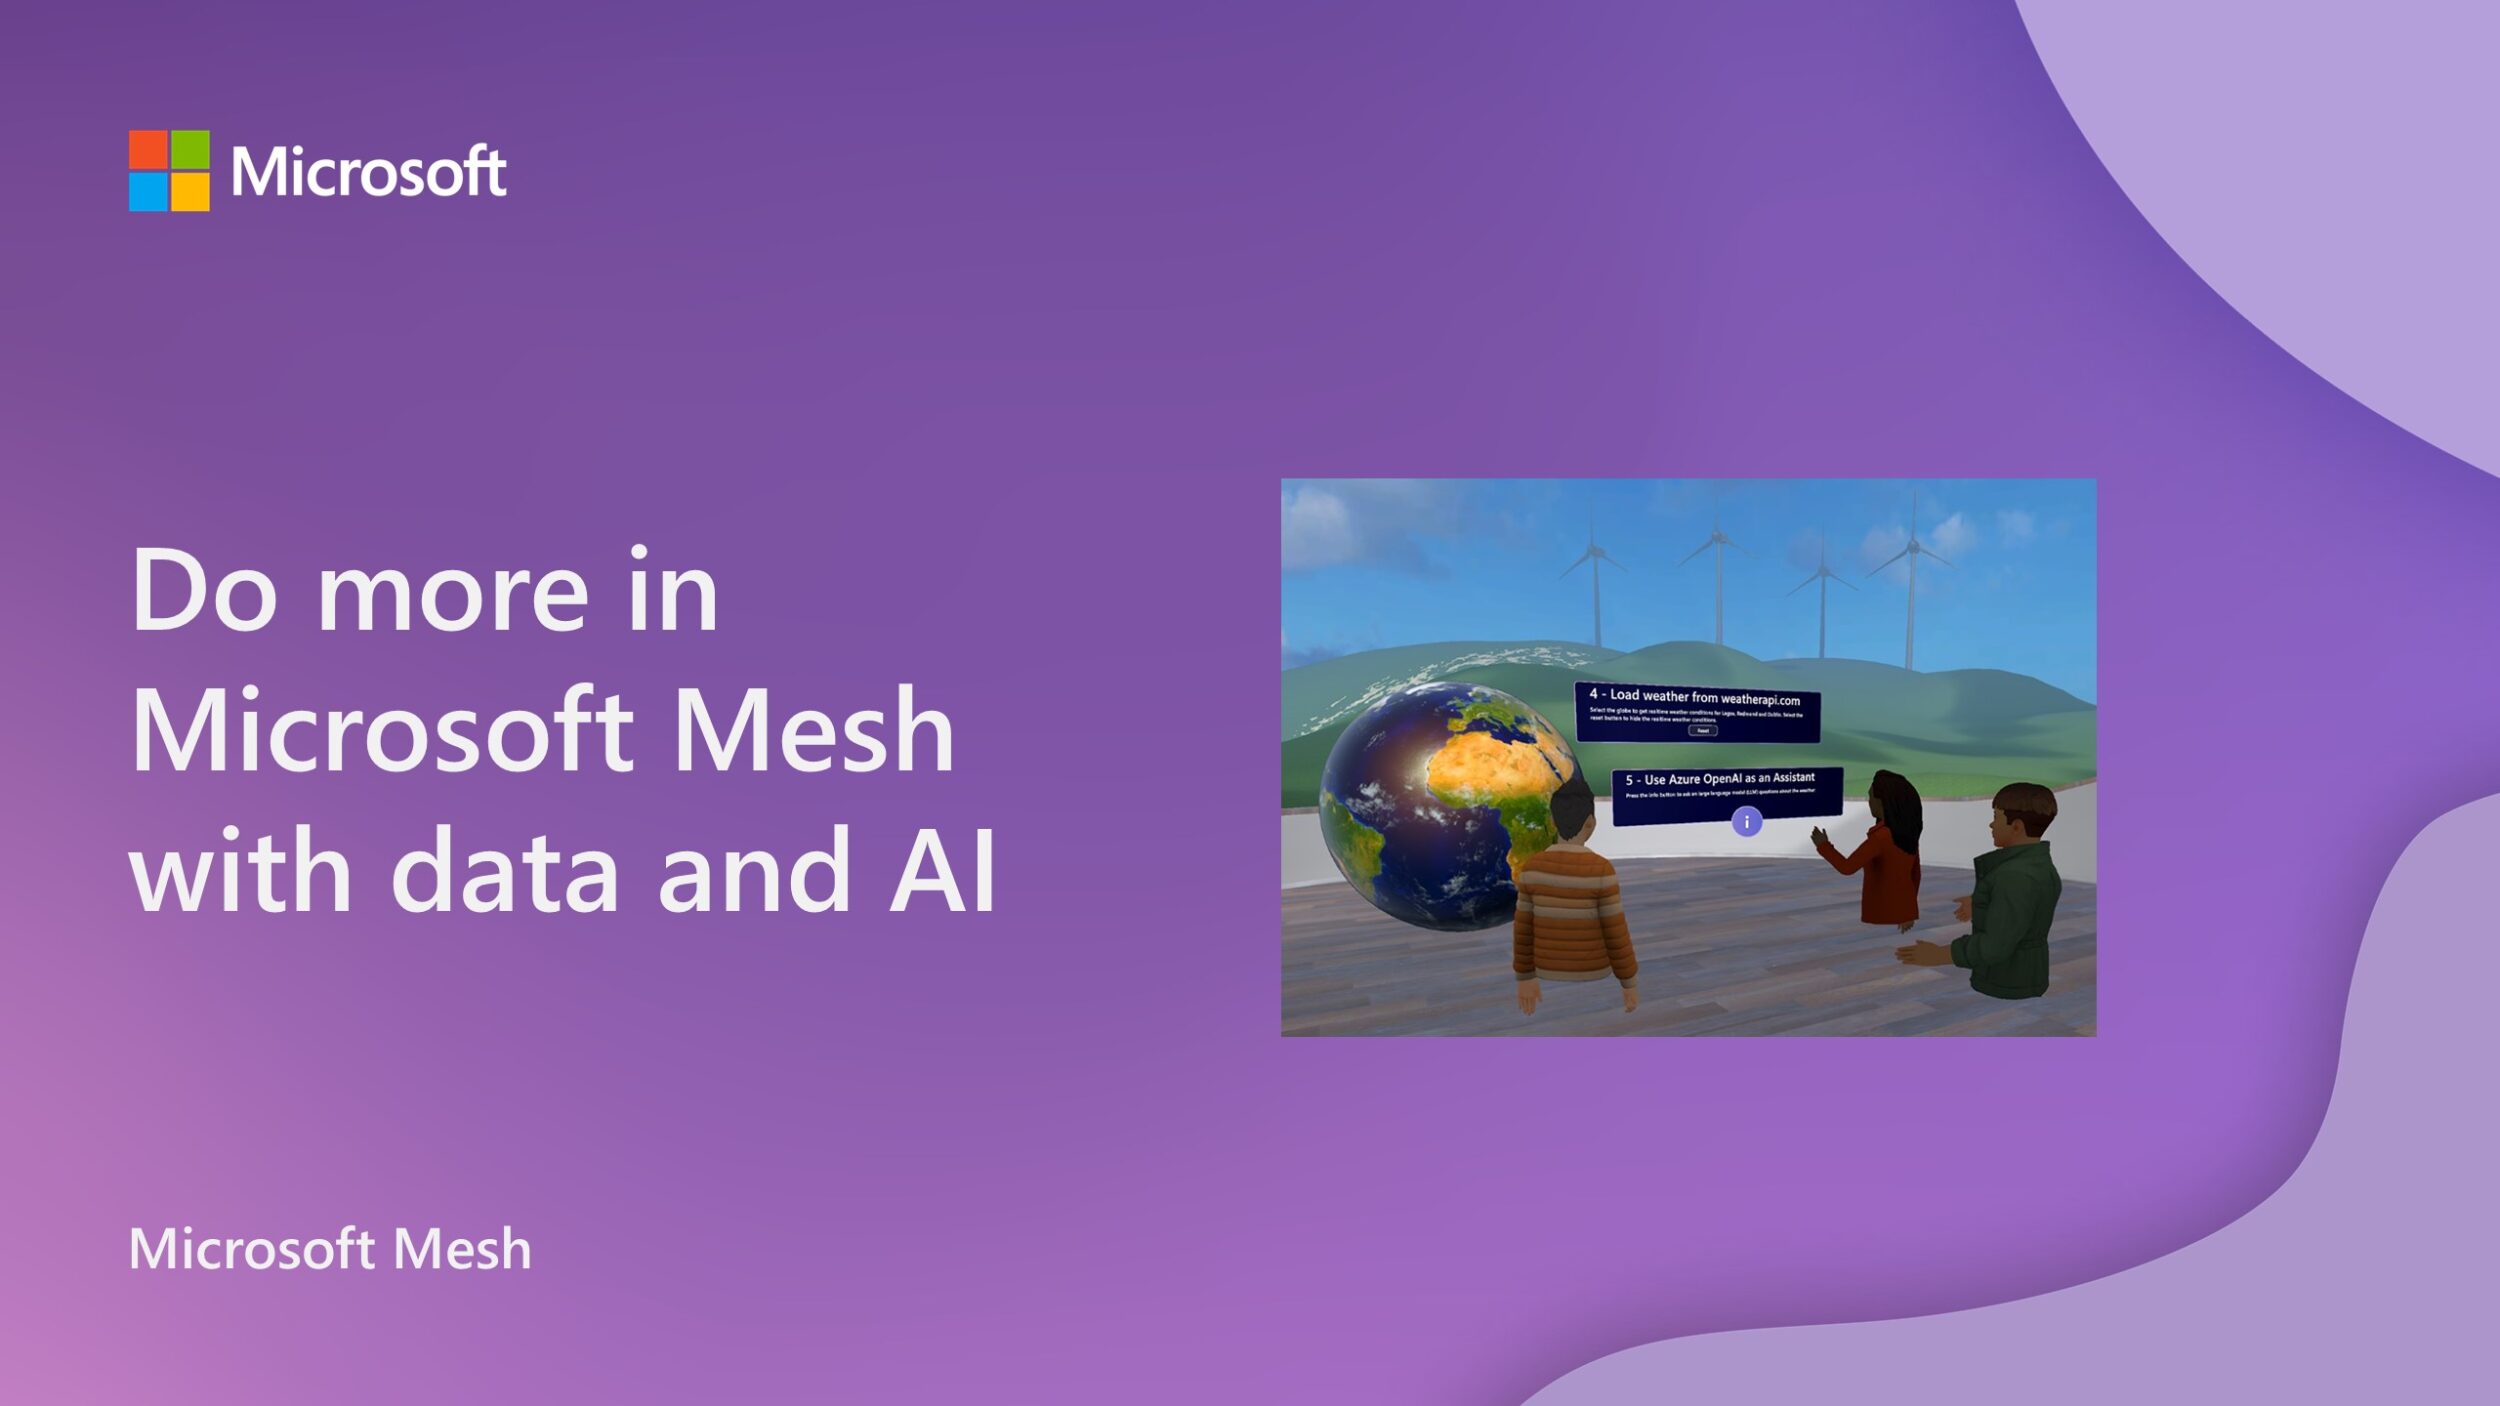 Do more in Microsoft Mesh with data and AI